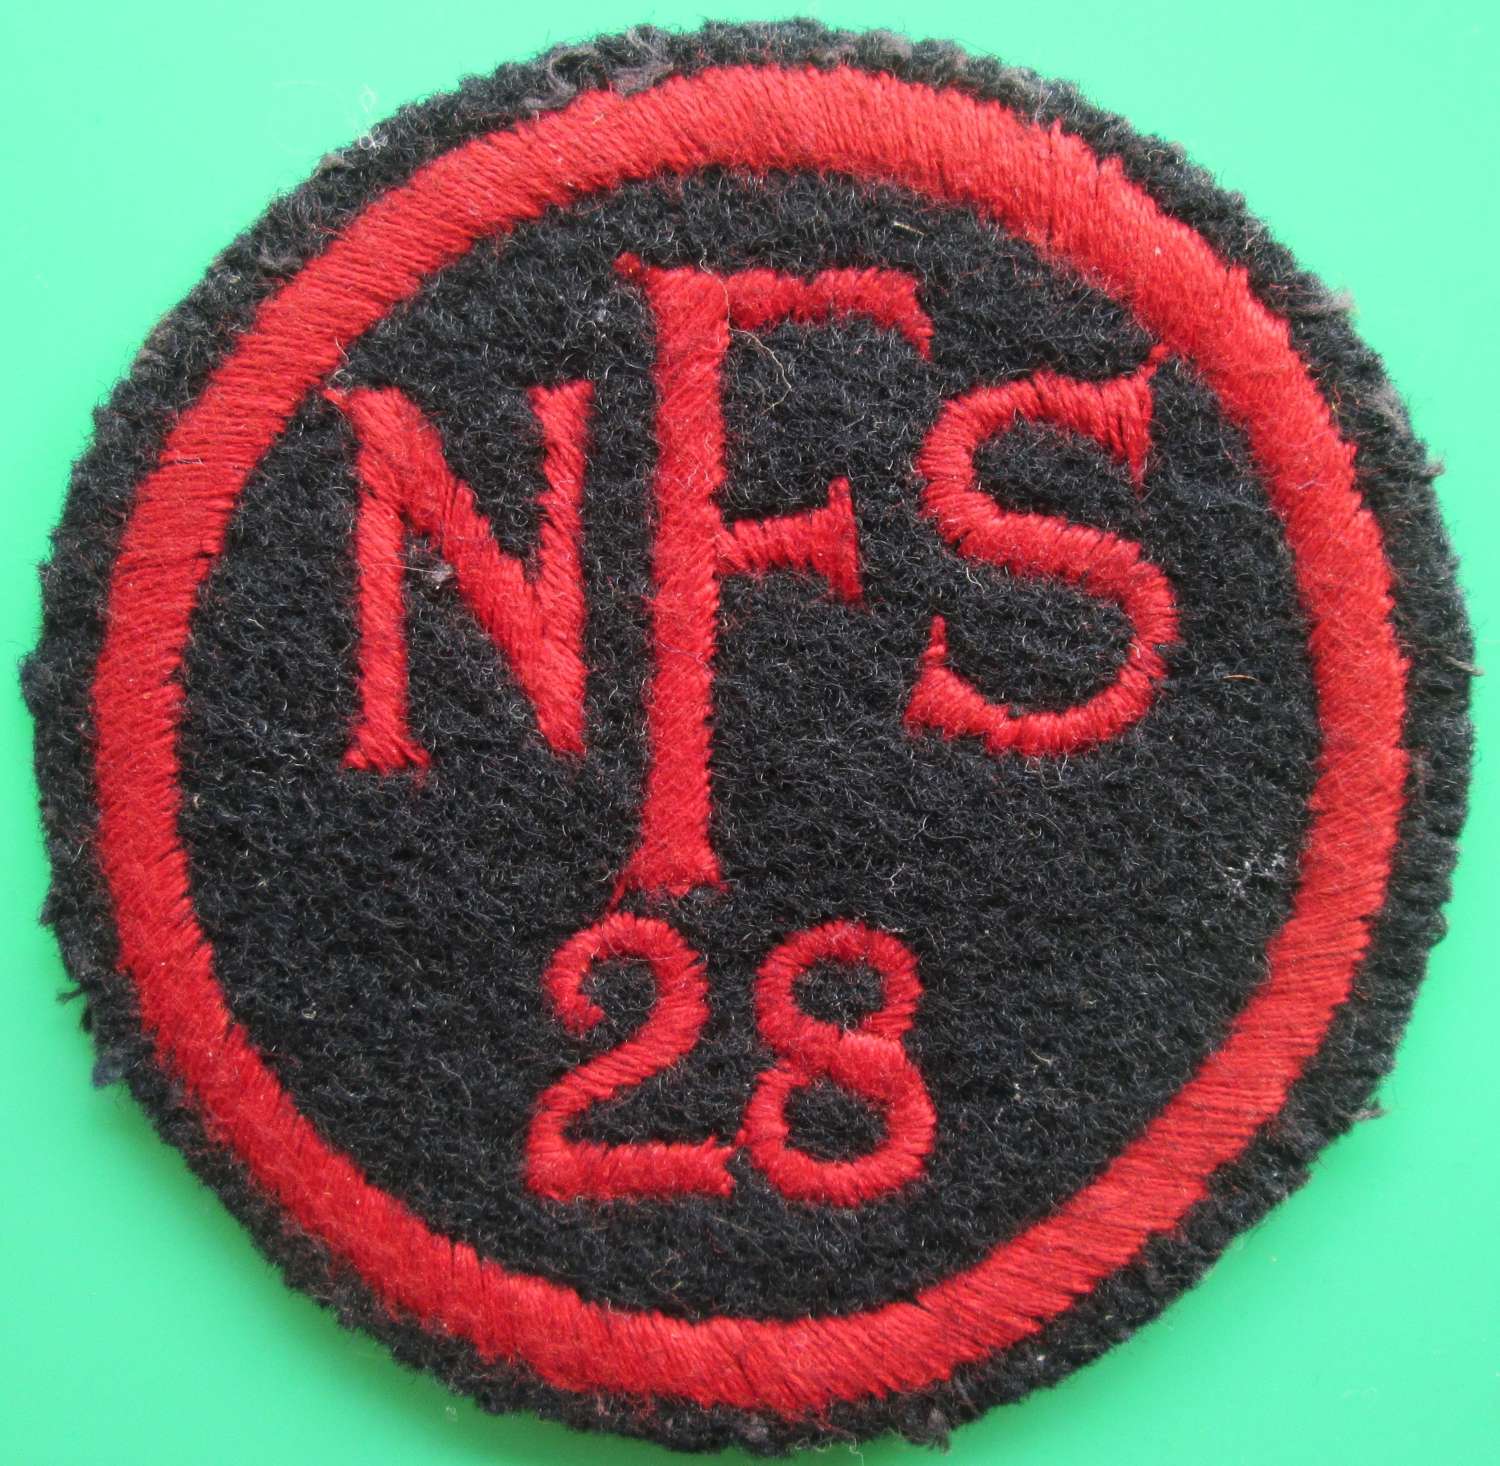 A NATIONAL FIRE SERVICE BREAST BADGE